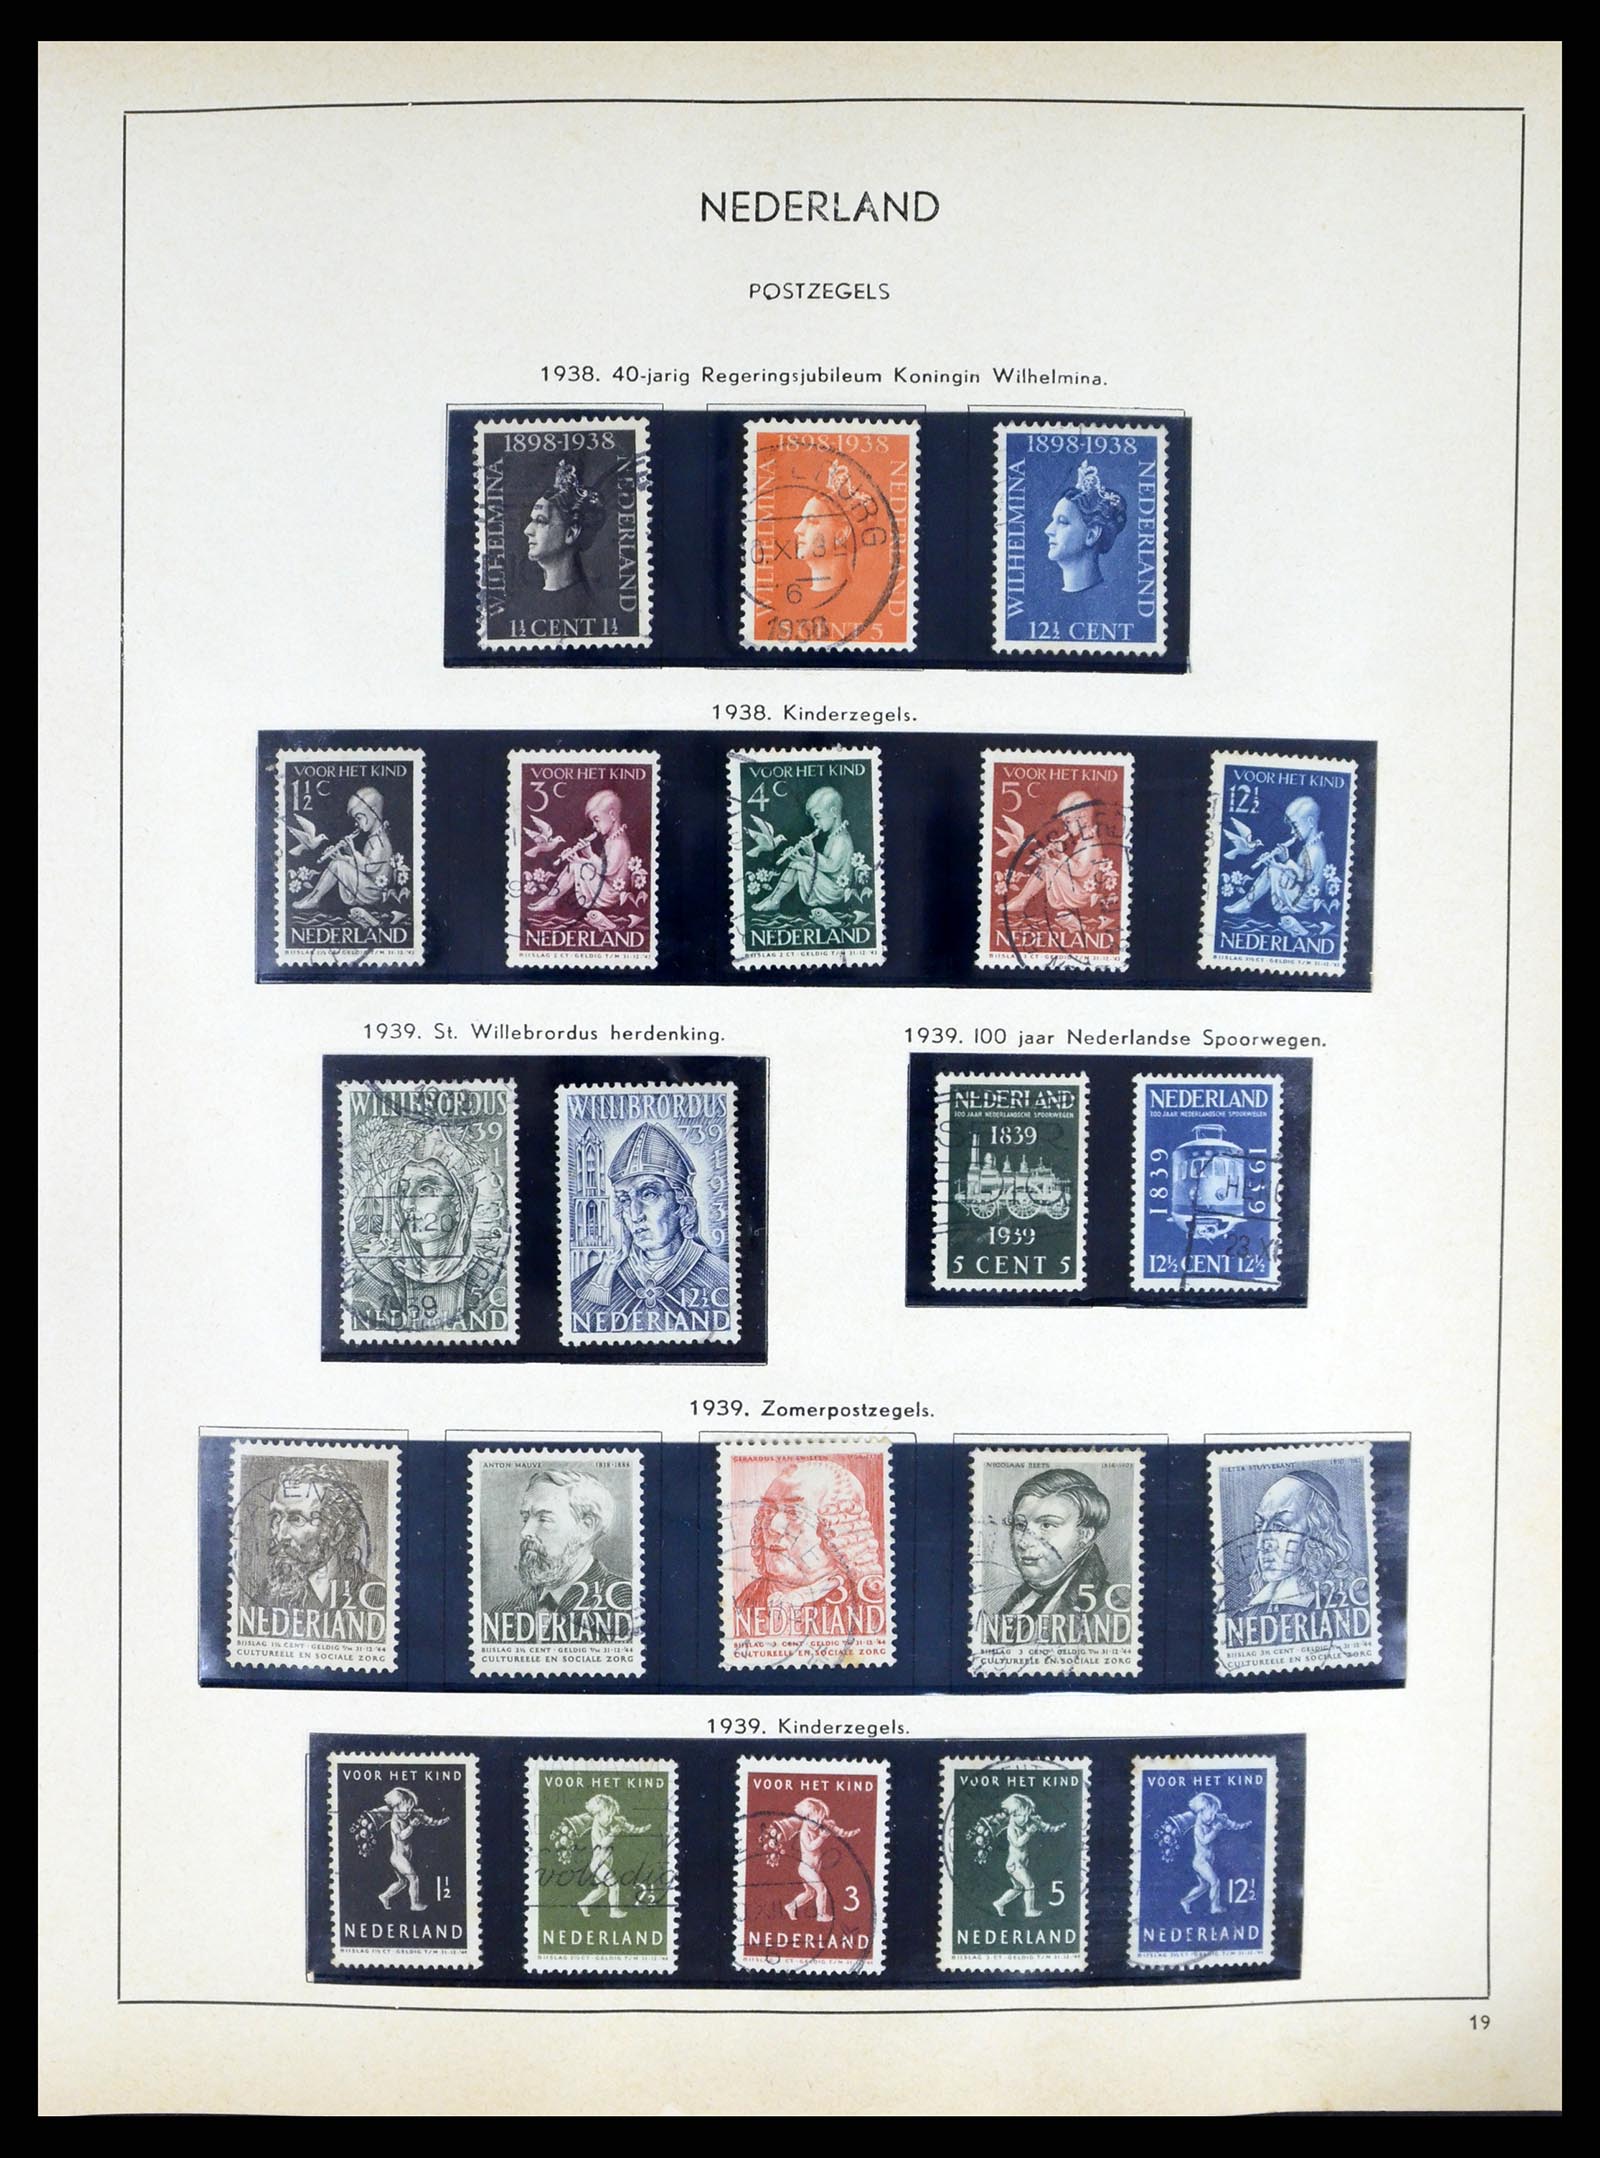 37618 015 - Stamp collection 37618 Netherlands and territories 1852-1972.